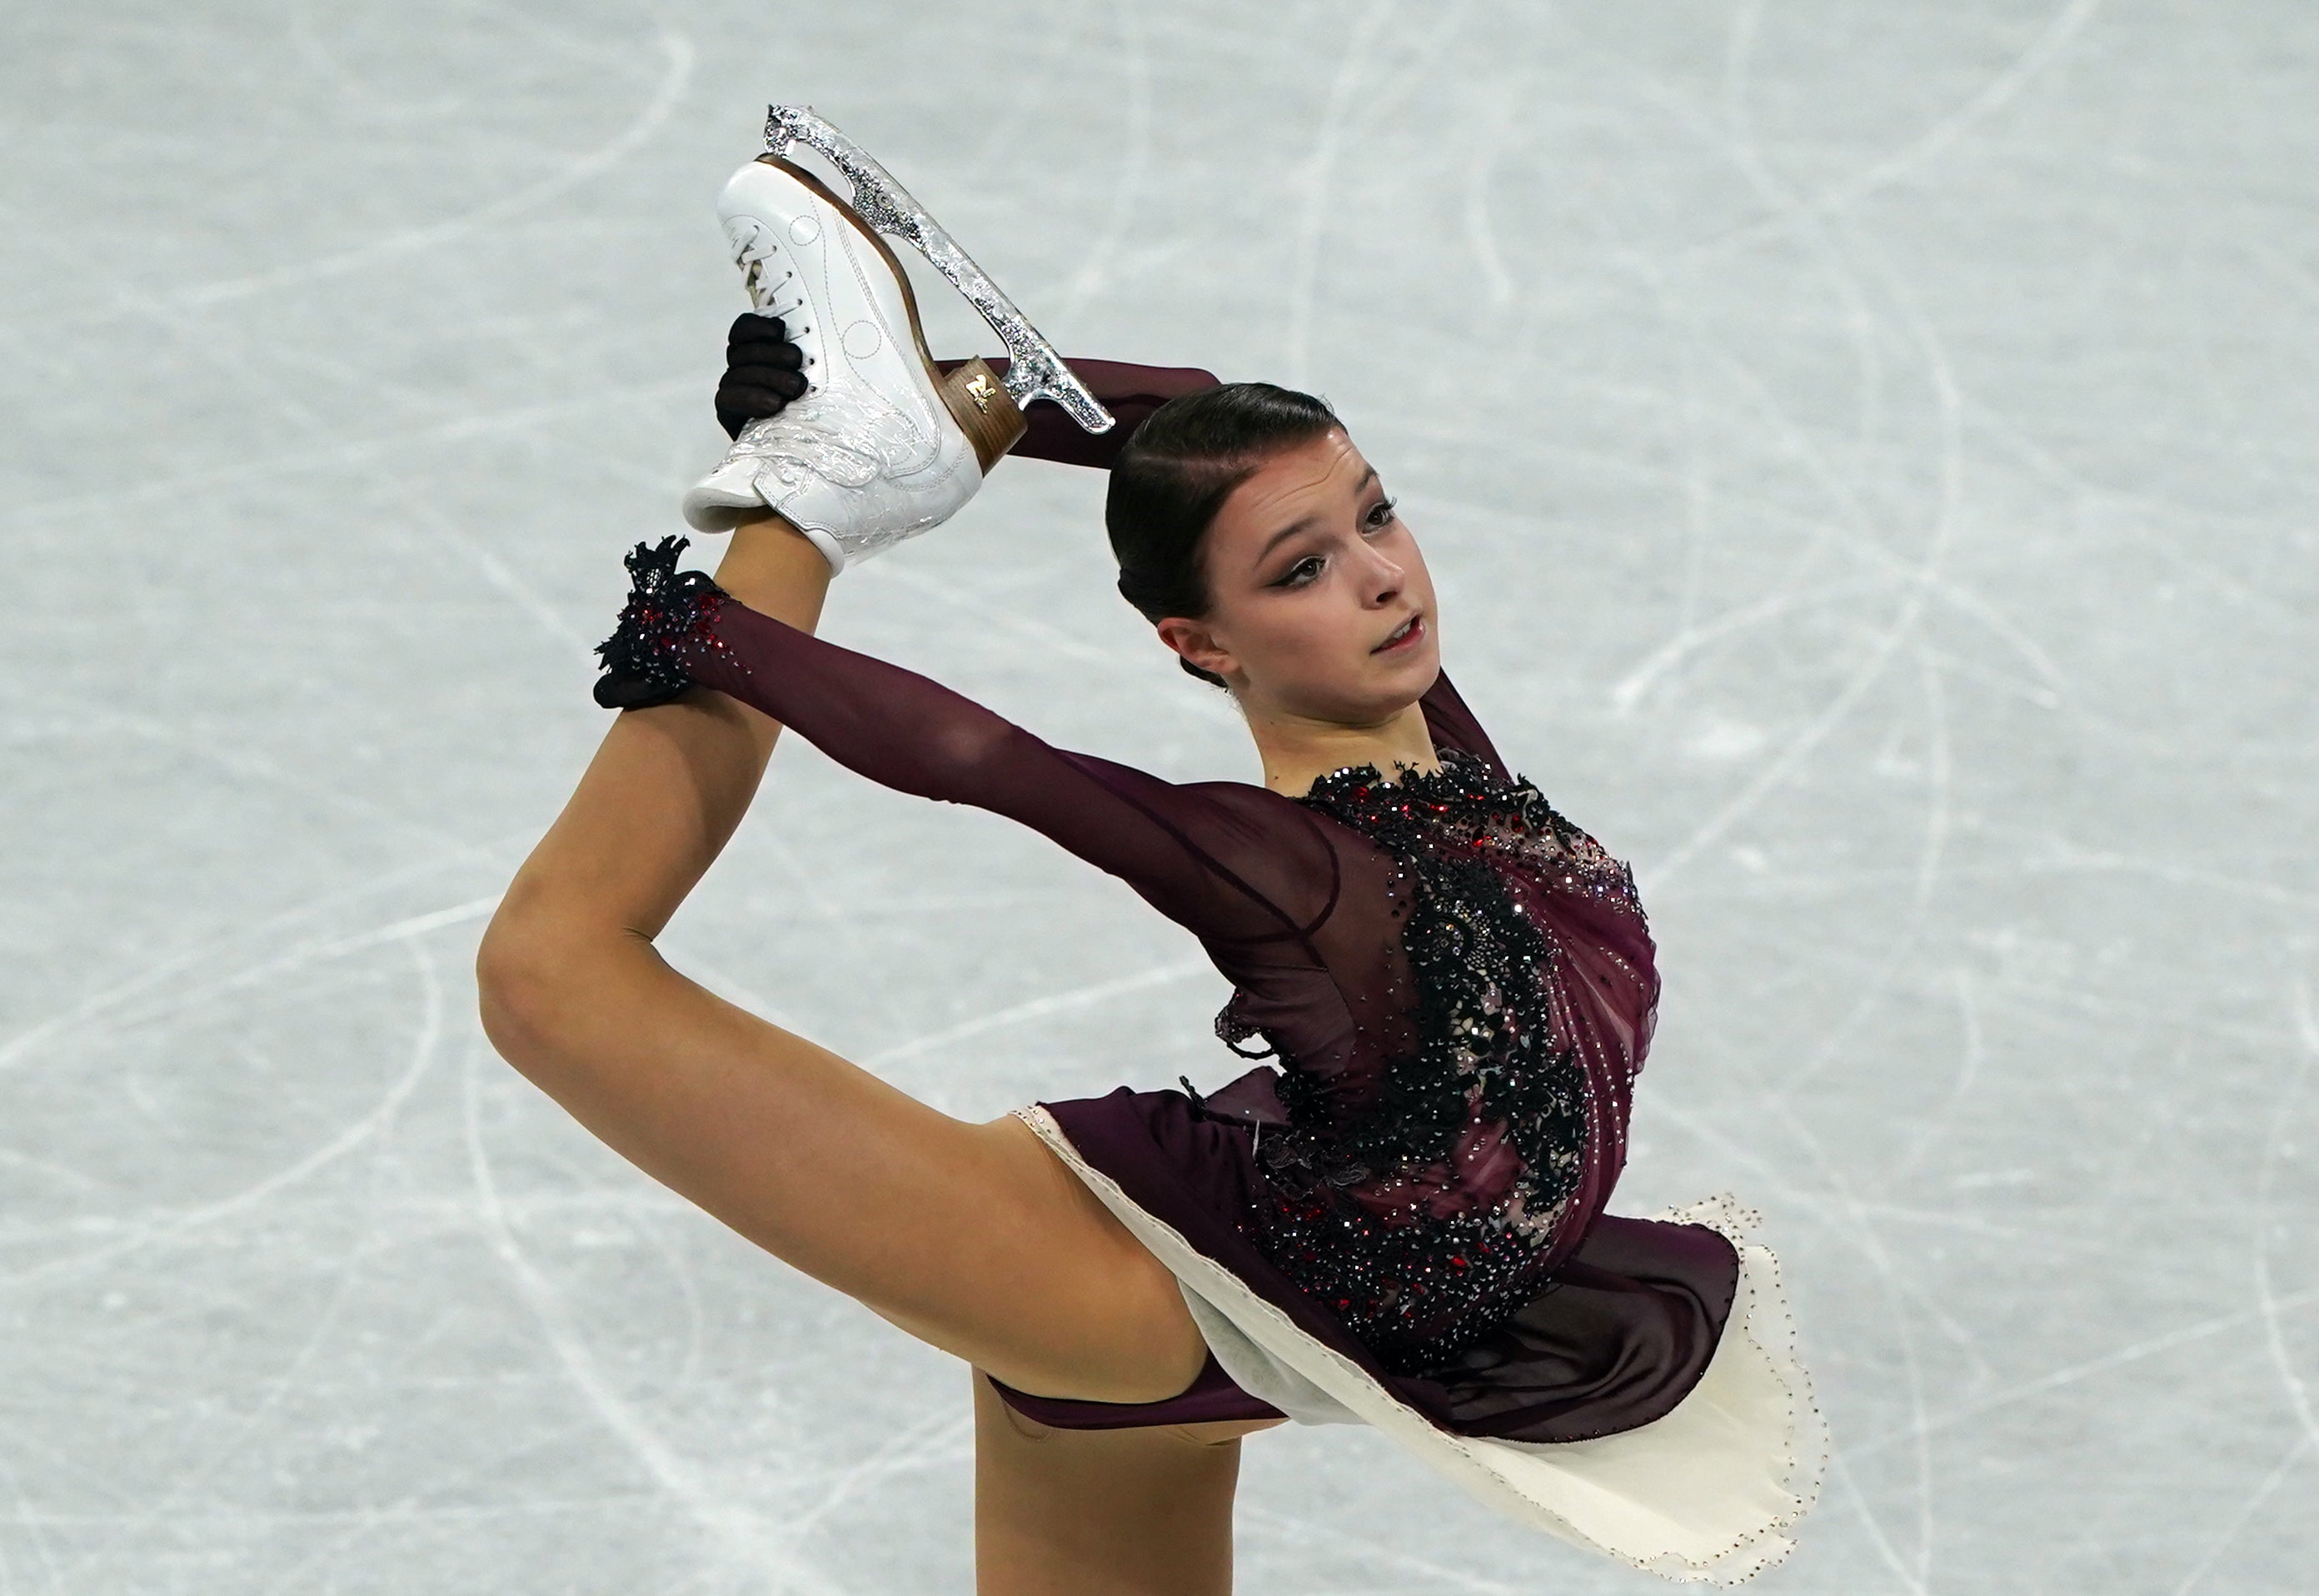 Olympic champion Anna Shcherbakova will also be competing in Saransk (Andrew Milligan/PA)